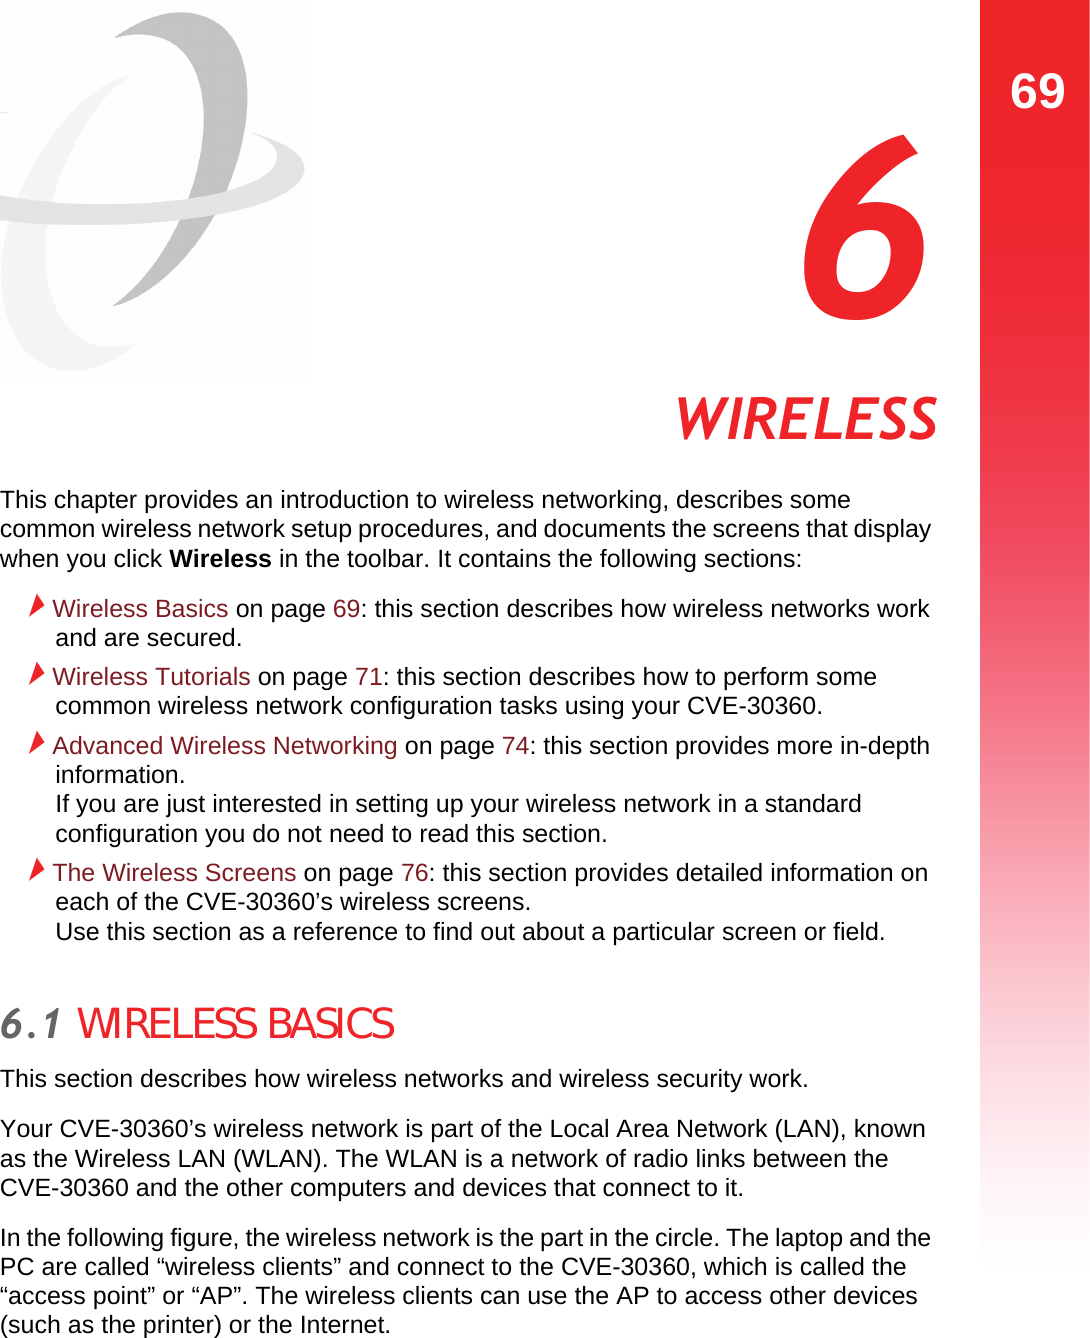 69WIRELESS  6 WIRELESSThis chapter provides an introduction to wireless networking, describes some common wireless network setup procedures, and documents the screens that display when you click Wireless in the toolbar. It contains the following sections:Wireless Basics on page 69: this section describes how wireless networks work and are secured.Wireless Tutorials on page 71: this section describes how to perform some common wireless network configuration tasks using your CVE-30360.Advanced Wireless Networking on page 74: this section provides more in-depth information.  If you are just interested in setting up your wireless network in a standard configuration you do not need to read this section.The Wireless Screens on page 76: this section provides detailed information on each of the CVE-30360’s wireless screens.  Use this section as a reference to find out about a particular screen or field.6.1 WIRELESS BASICSThis section describes how wireless networks and wireless security work.Your CVE-30360’s wireless network is part of the Local Area Network (LAN), known as the Wireless LAN (WLAN). The WLAN is a network of radio links between the CVE-30360 and the other computers and devices that connect to it.In the following figure, the wireless network is the part in the circle. The laptop and the PC are called “wireless clients” and connect to the CVE-30360, which is called the “access point” or “AP”. The wireless clients can use the AP to access other devices (such as the printer) or the Internet.